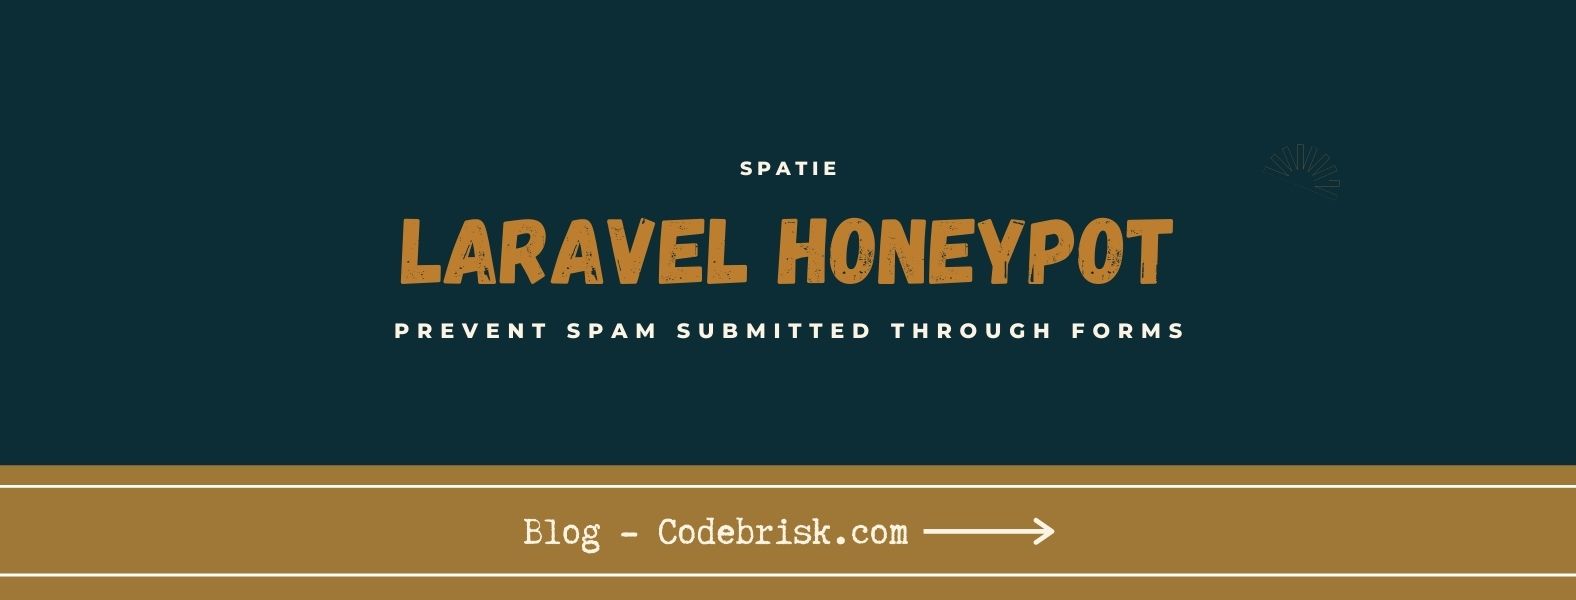 Laravel Honeypot - Prevent spam submitted through forms cover image